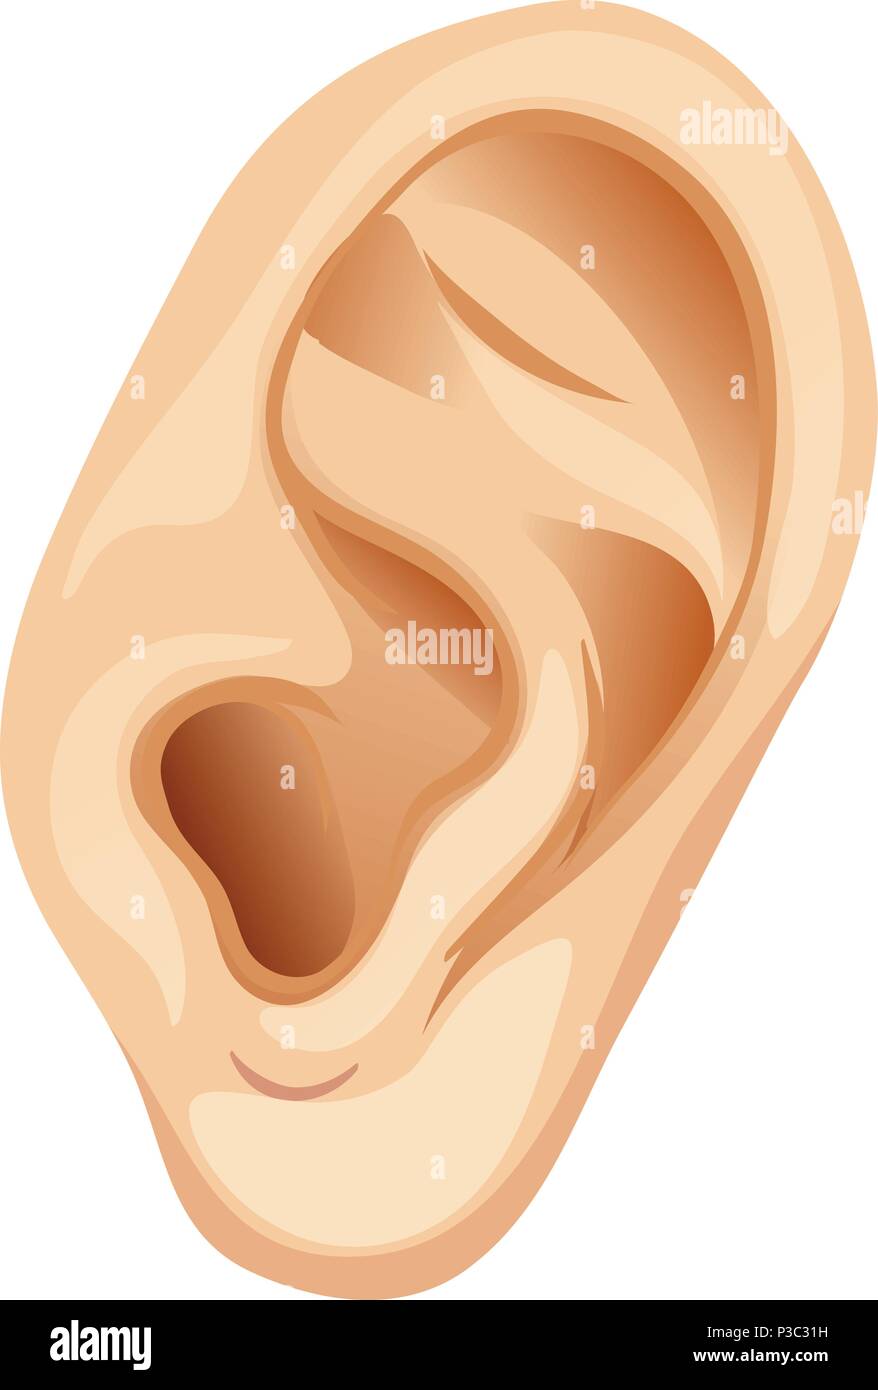 A Human Ear on White Background illustration Stock Vector